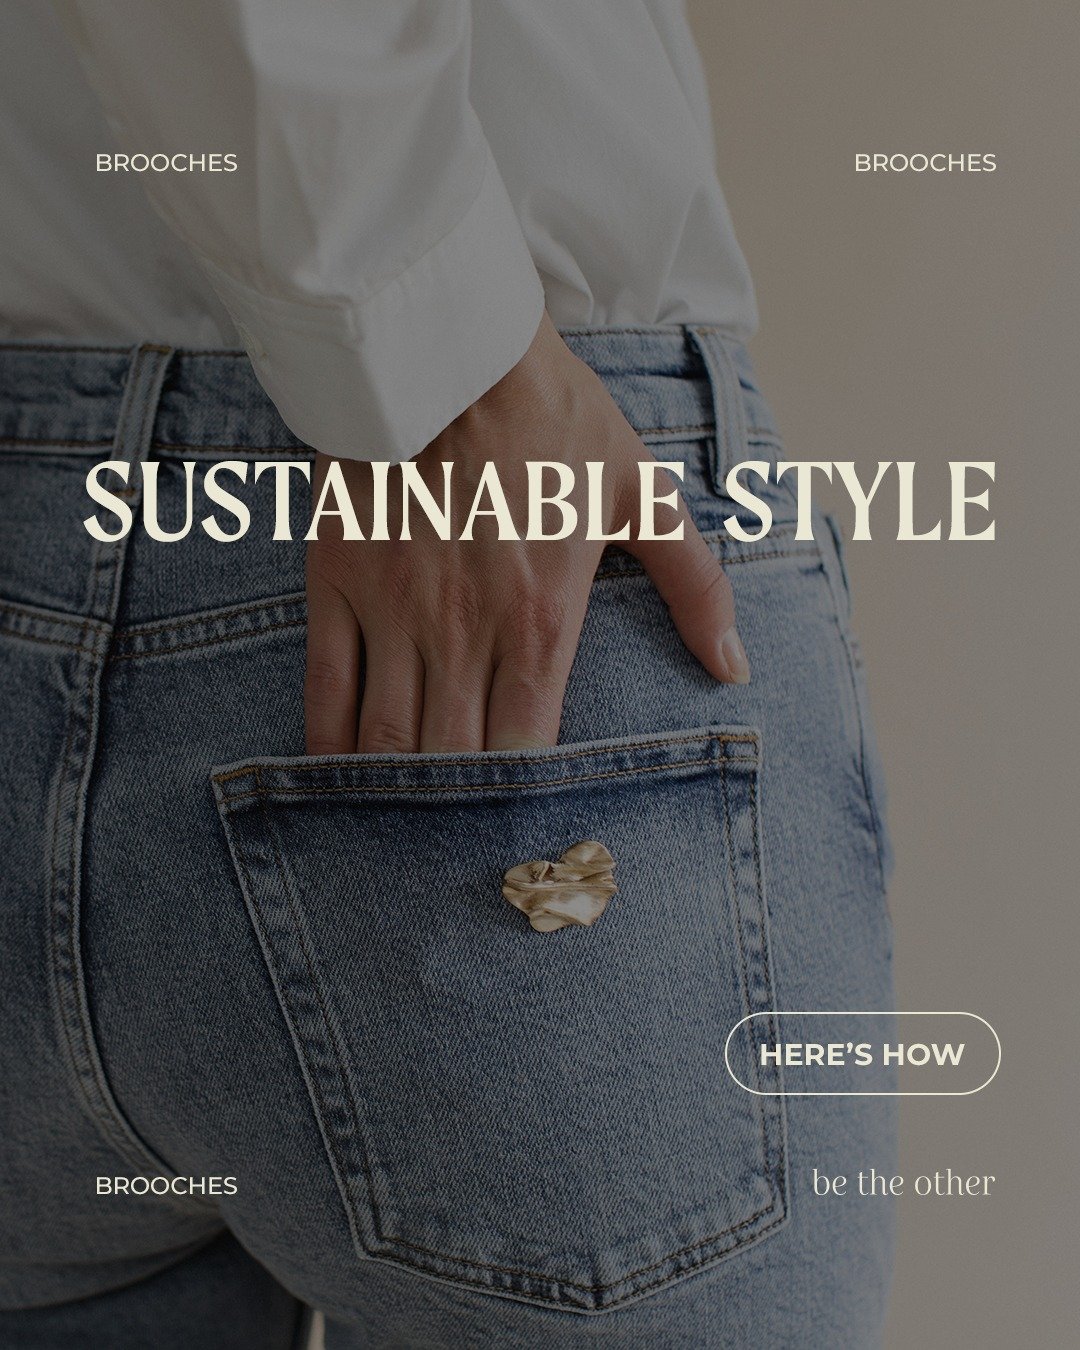 ✨ Swipe to discover: 5 reasons why brooches are the go-to for sustainable style! 💎🌿

From timeless versatility to reducing carbon footprint, explore how brooches and pins are the perfect accessory for a greener planet! 🌍💫 #SustainableStyle 

#BeT